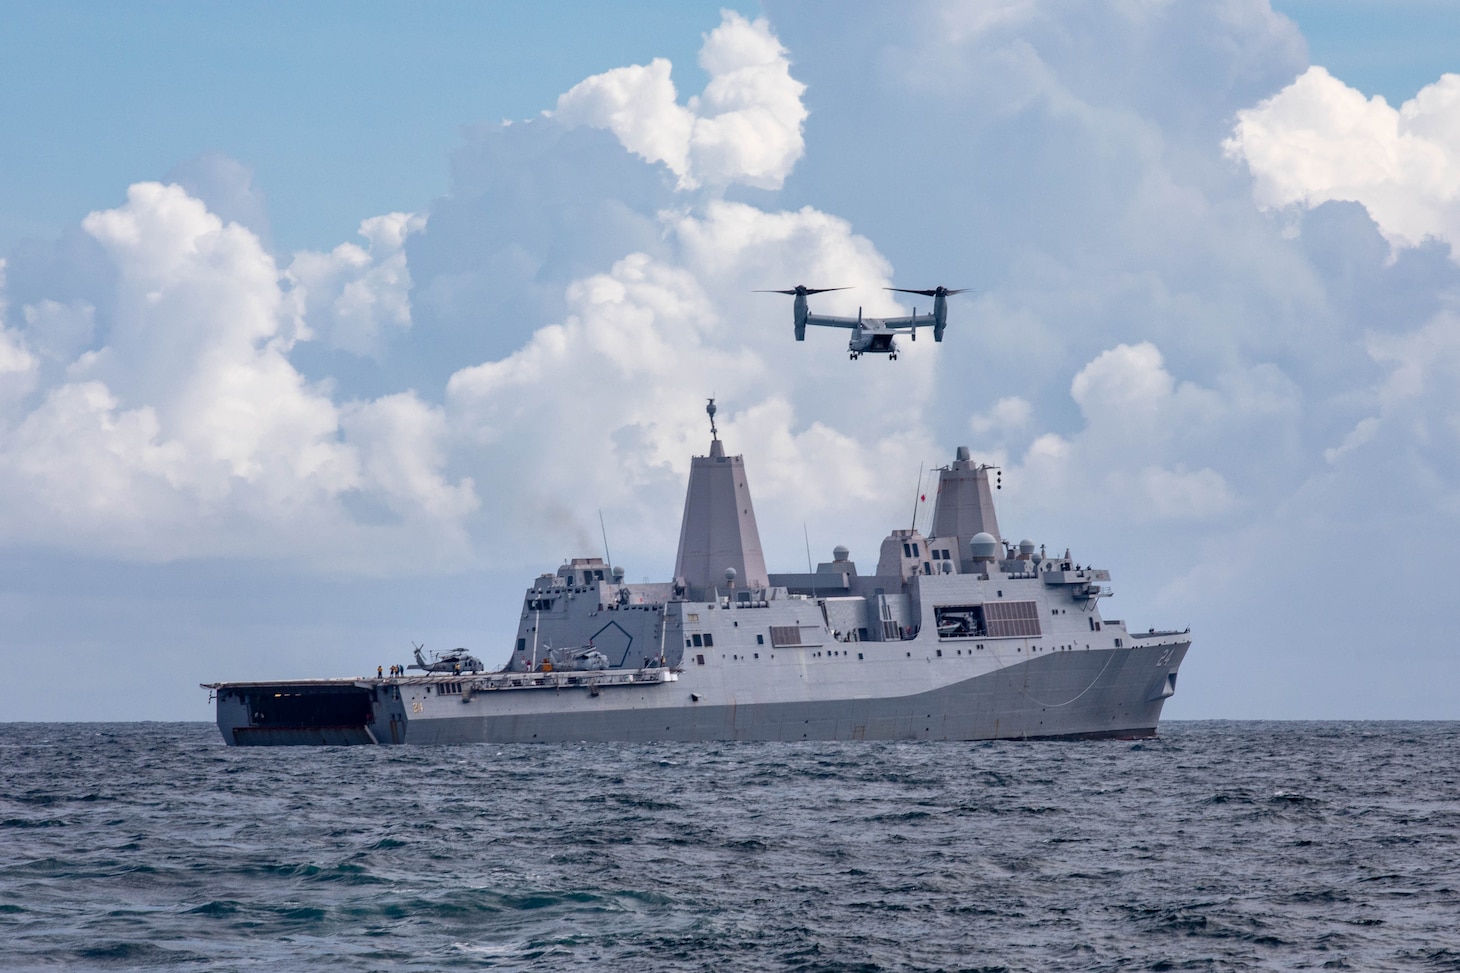 An MV-22 Osprey transport aircraft assigned to the “Fighting Griffins” of Marine Medium Tiltrotor Squadron (VMM) 266 prepares to land on the San Antonio-class amphibious transport dock ship USS Arlington (LPD 24) to deliver supplies in support of the ship’s mission to Haiti, Aug. 18, 2021.